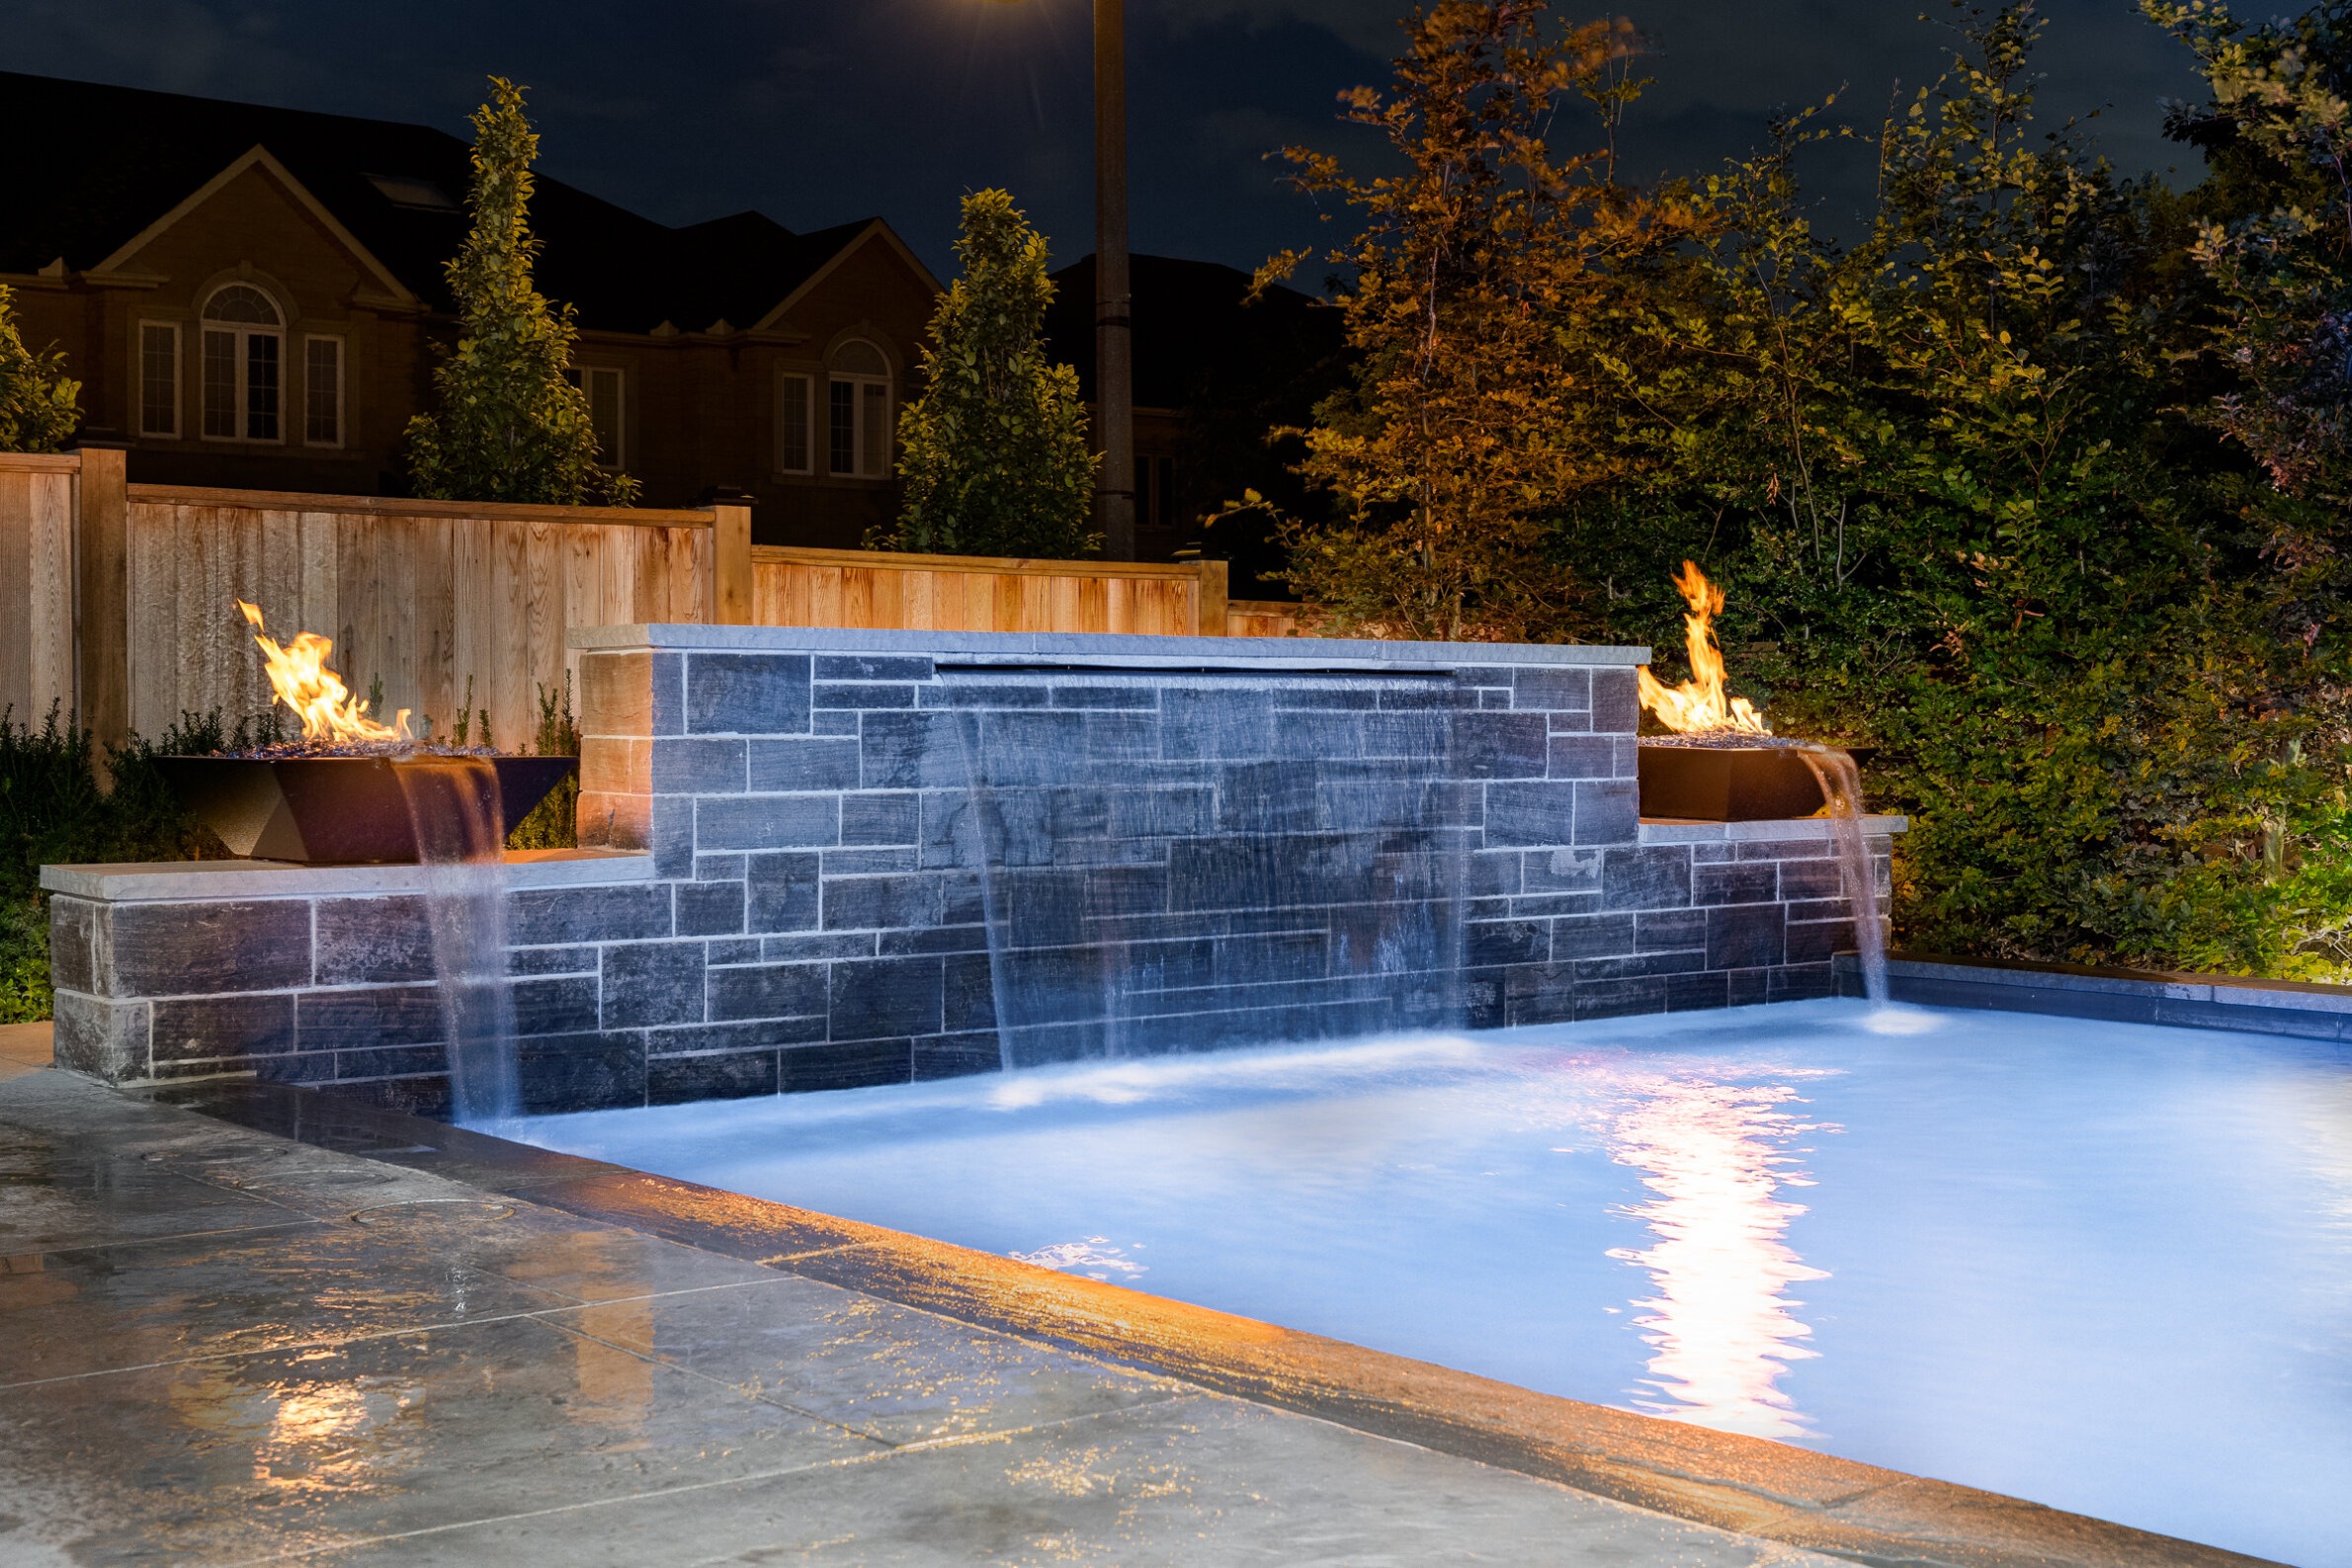 An outdoor pool at night with an illuminated water wall and fire features, surrounded by a wooden fence and dark suburban houses.